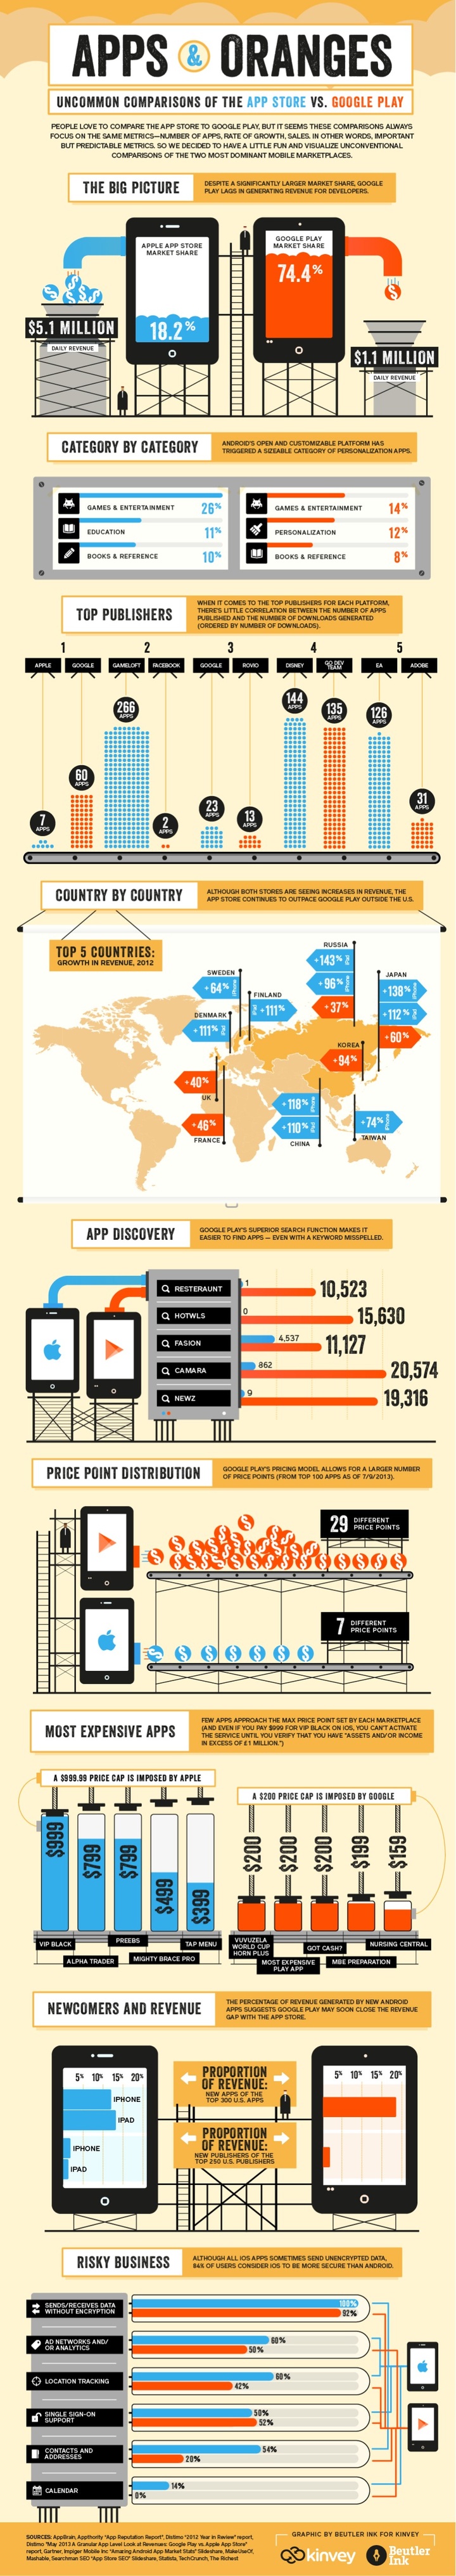 kinvey_apps_and_oranges_infographic 1